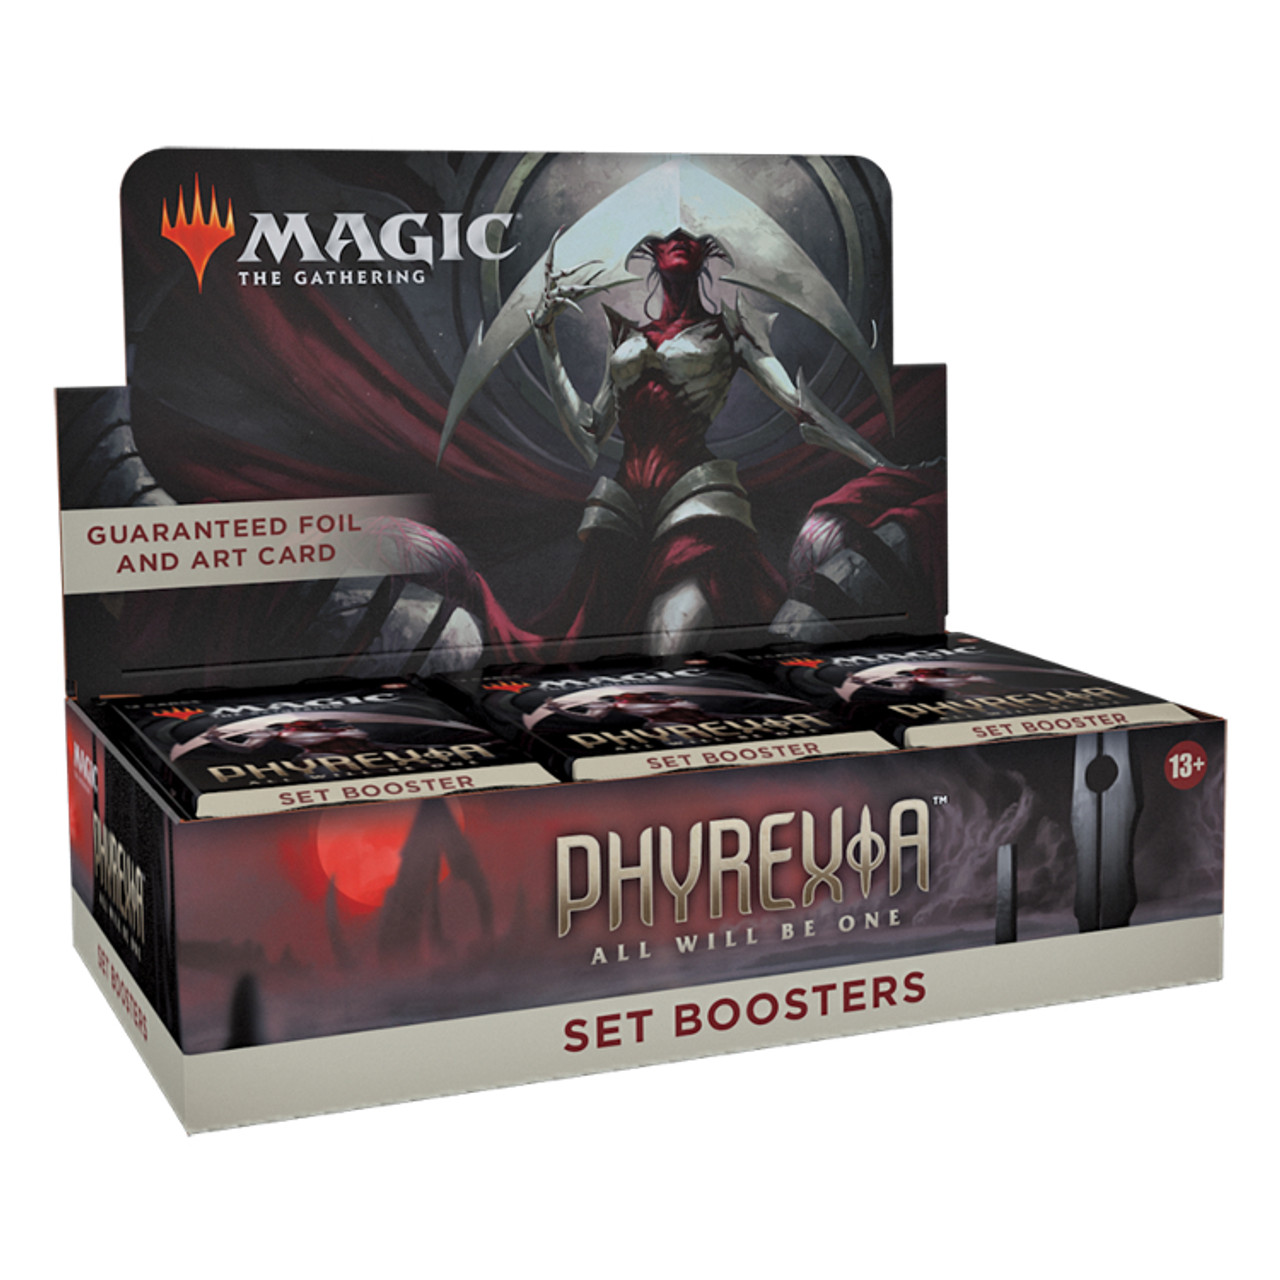 Magic: The Gathering - Phyrexia - All Will Be One - Set Booster Box